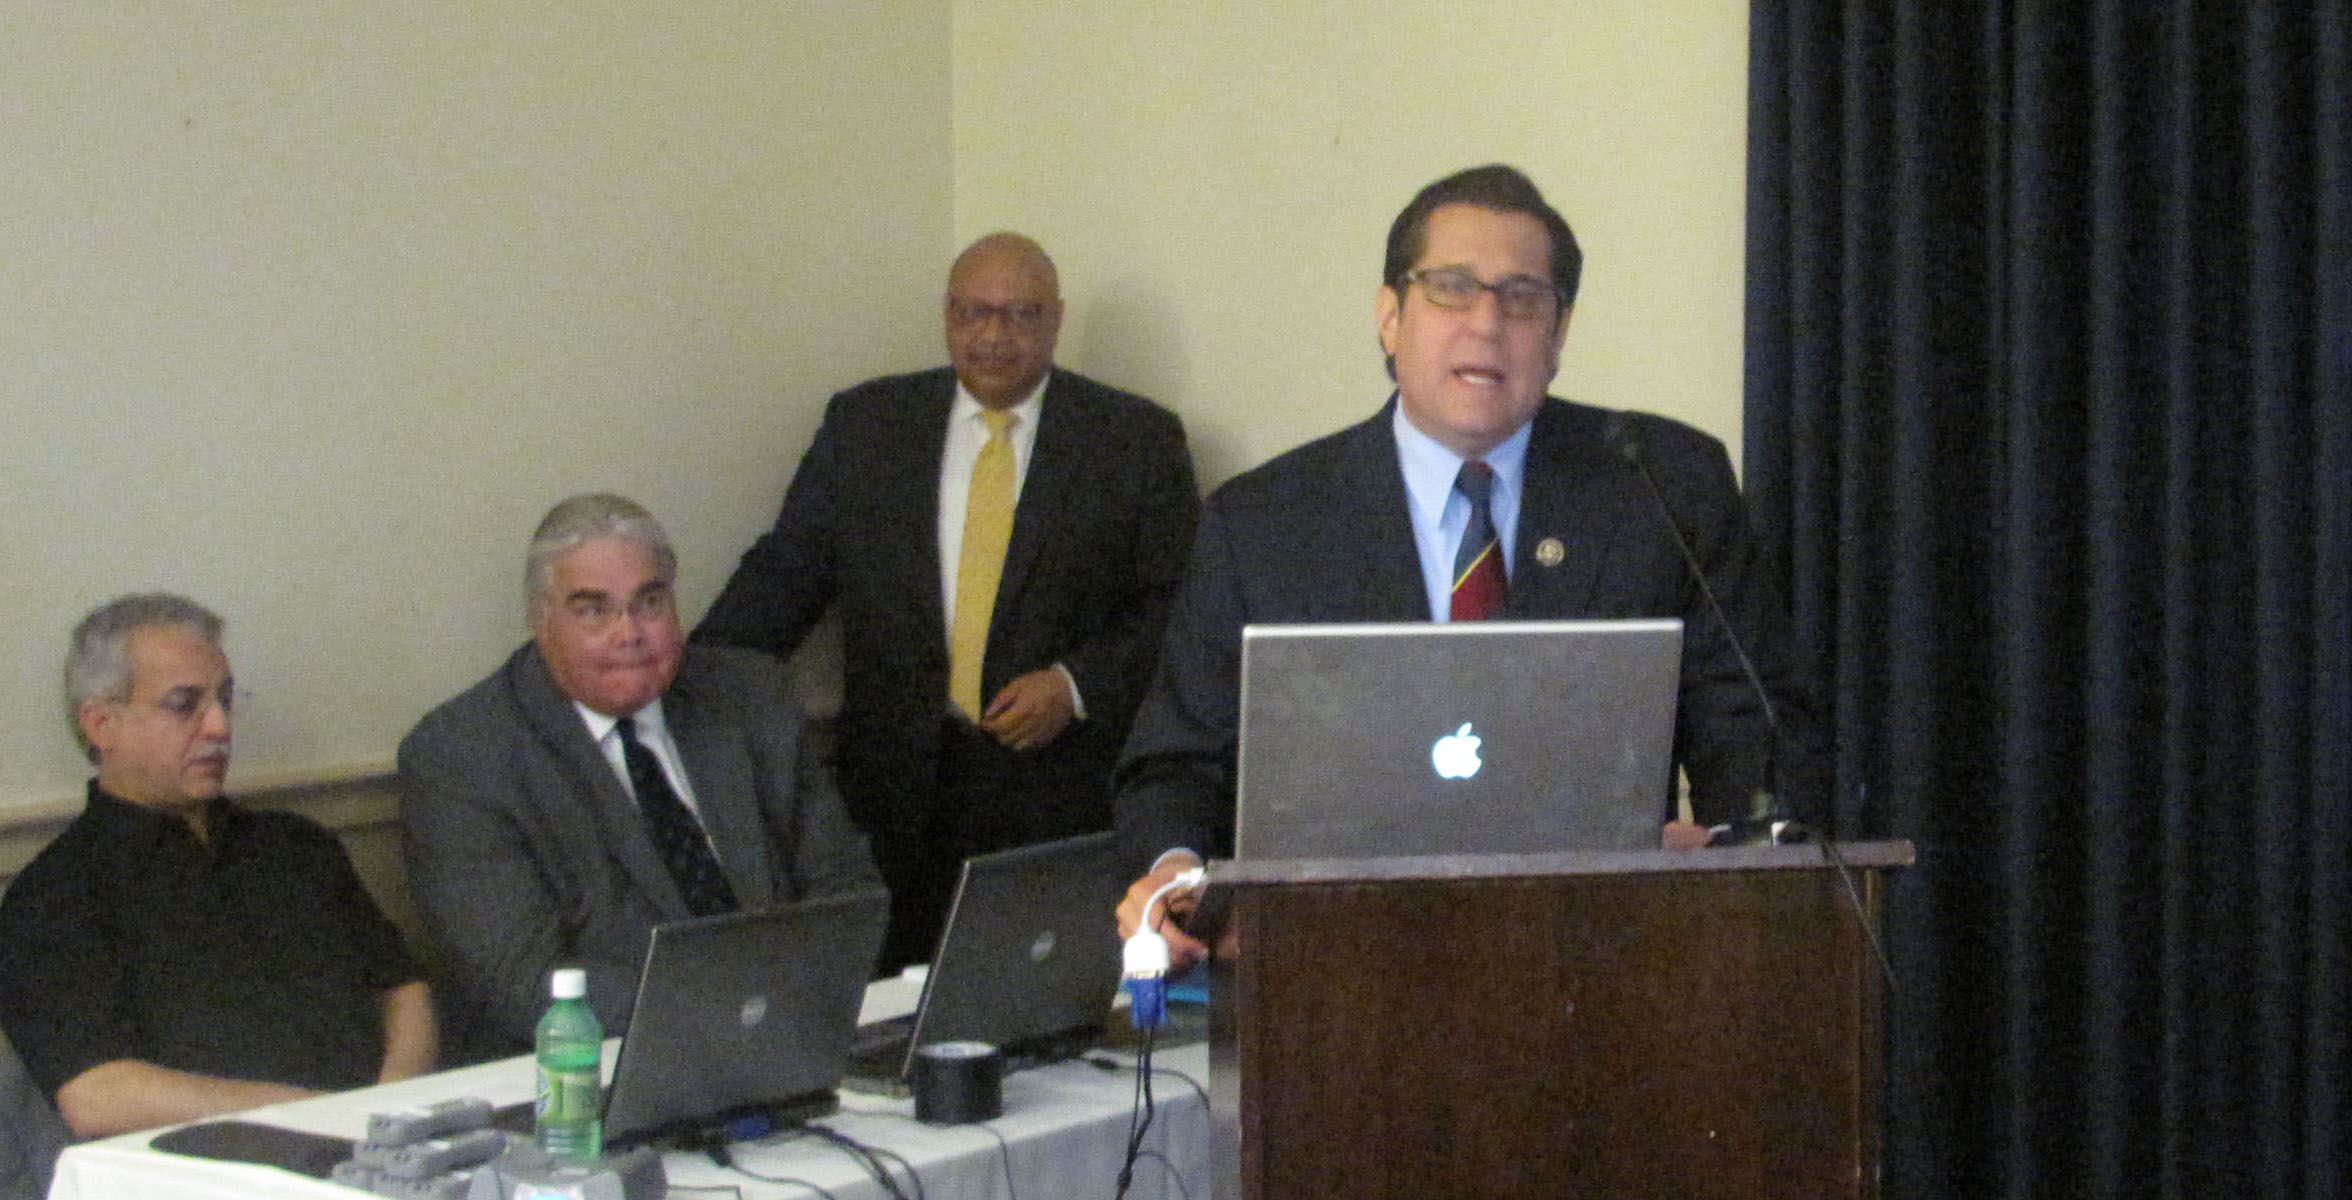 Representative Rothman Speaks at Prostate Cancer Briefing on 
Capitol Hill